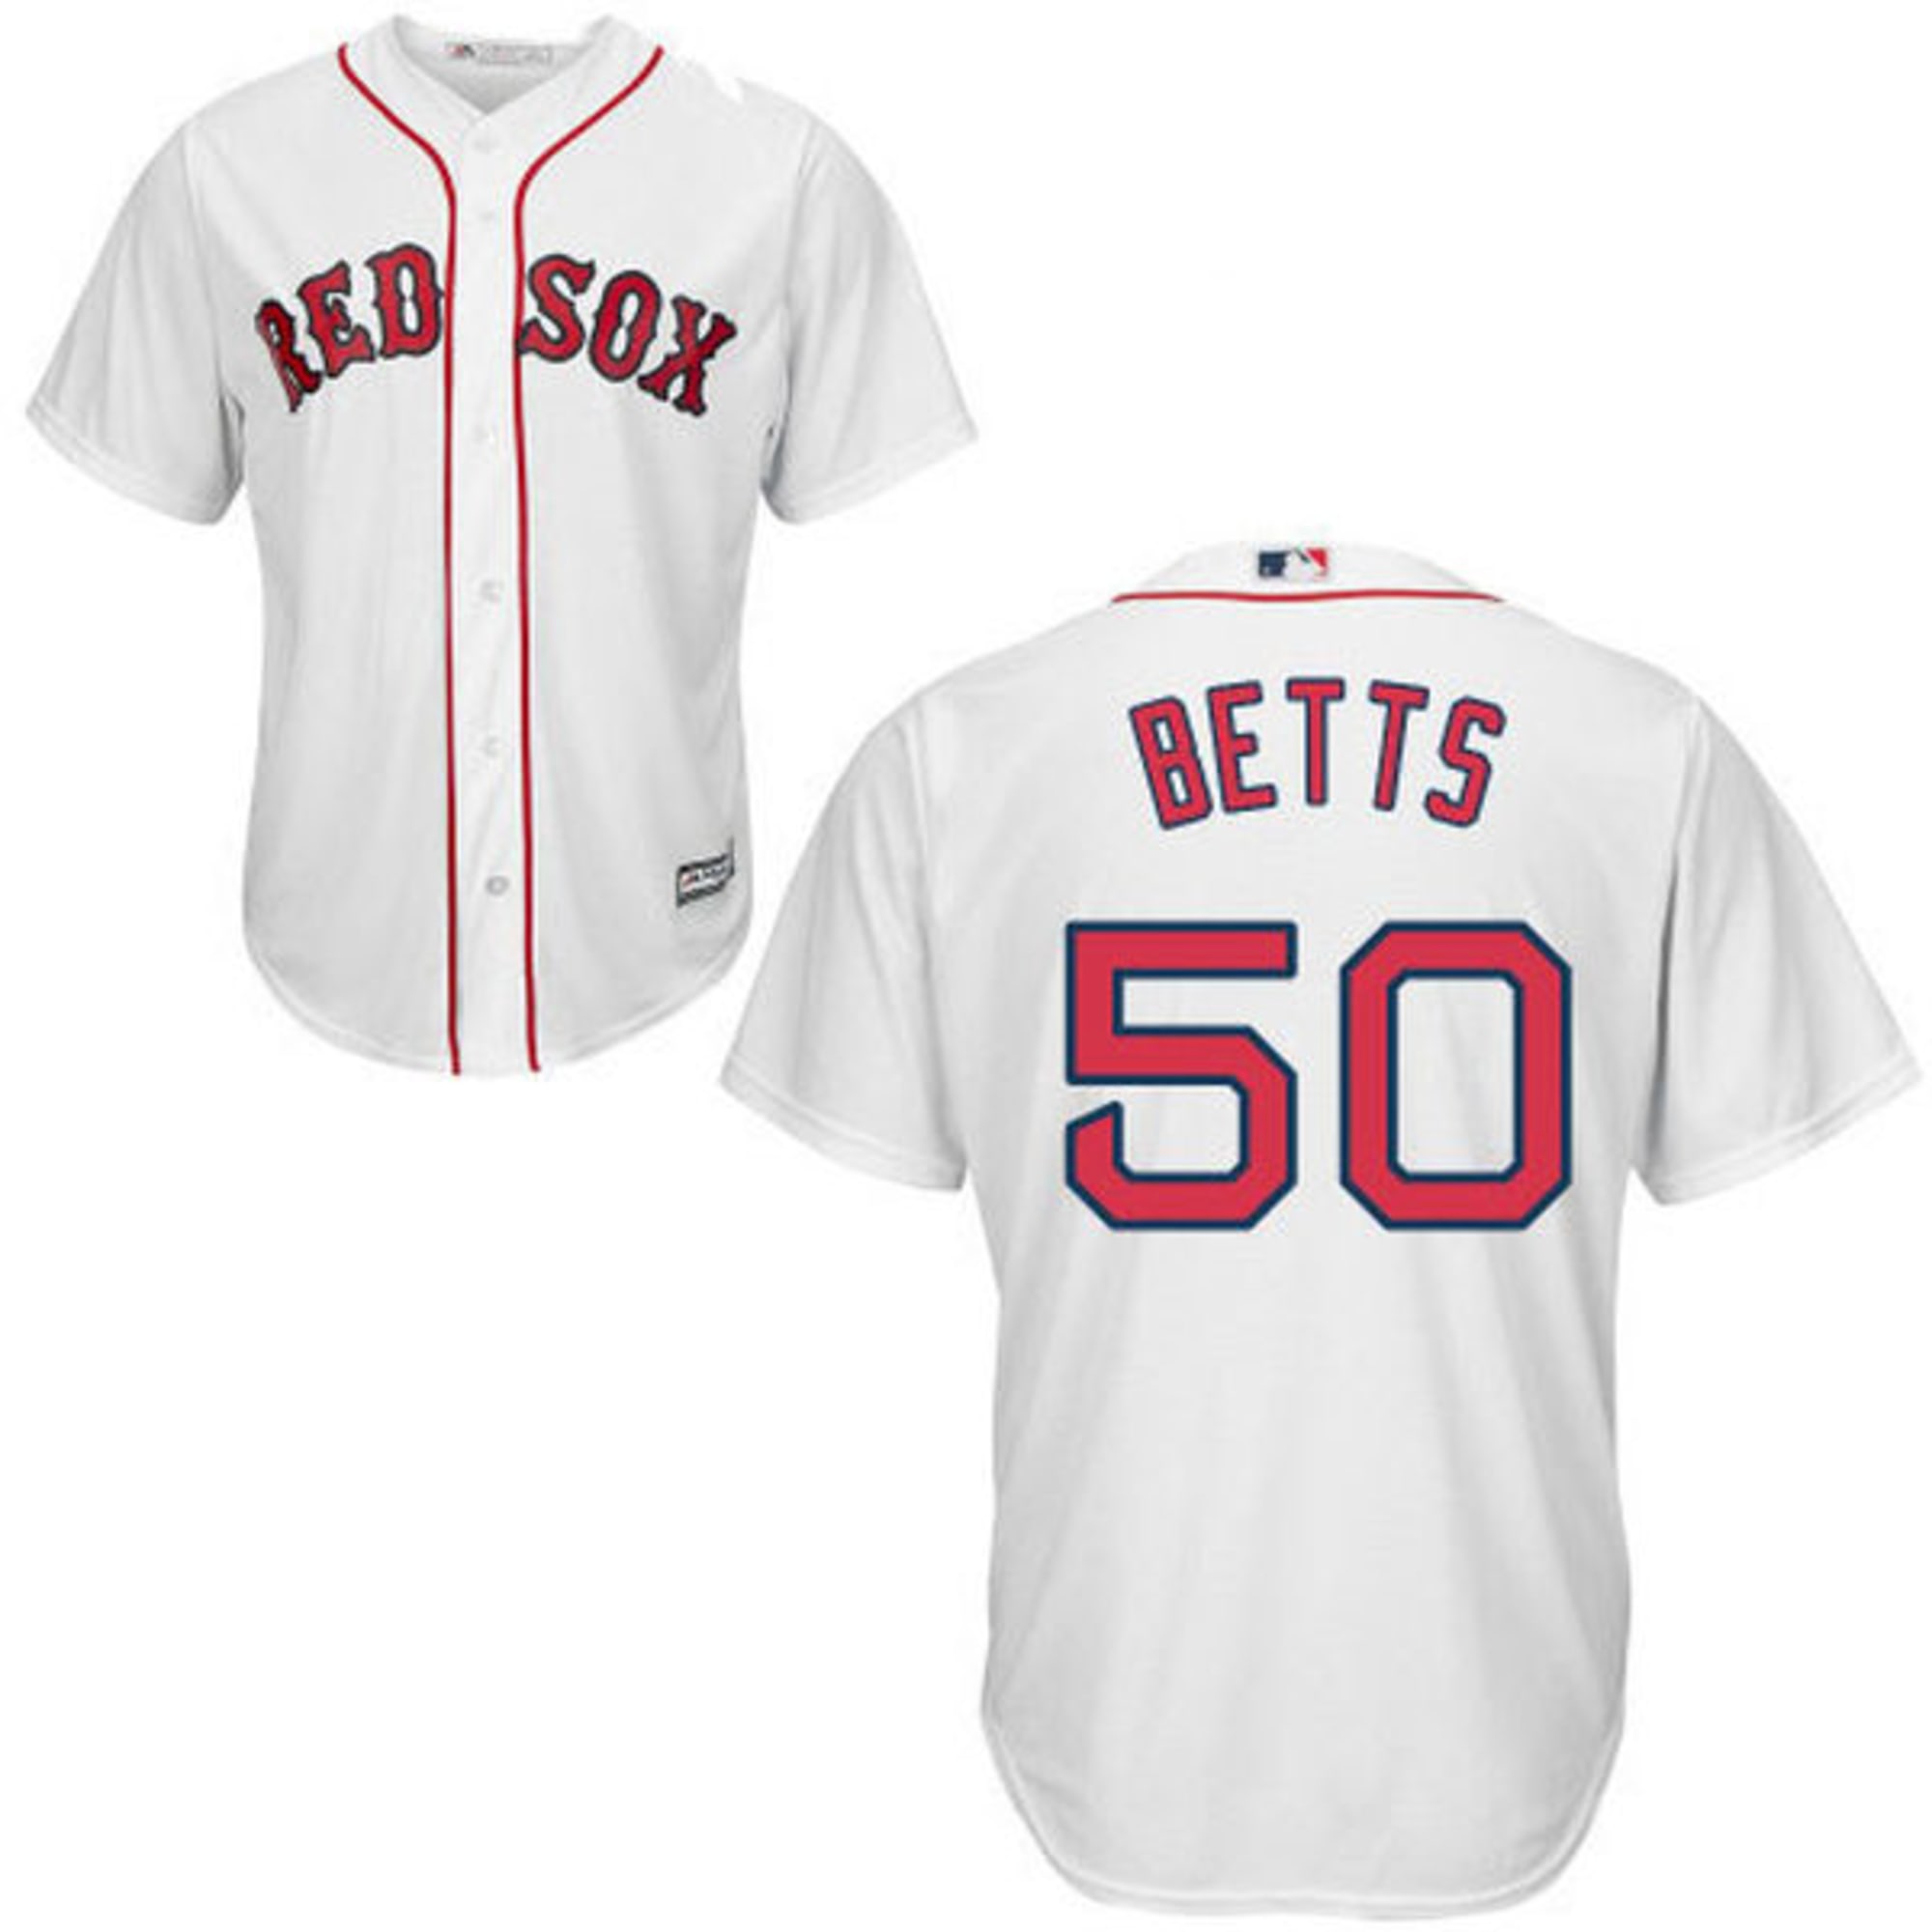 sale red sox jersey